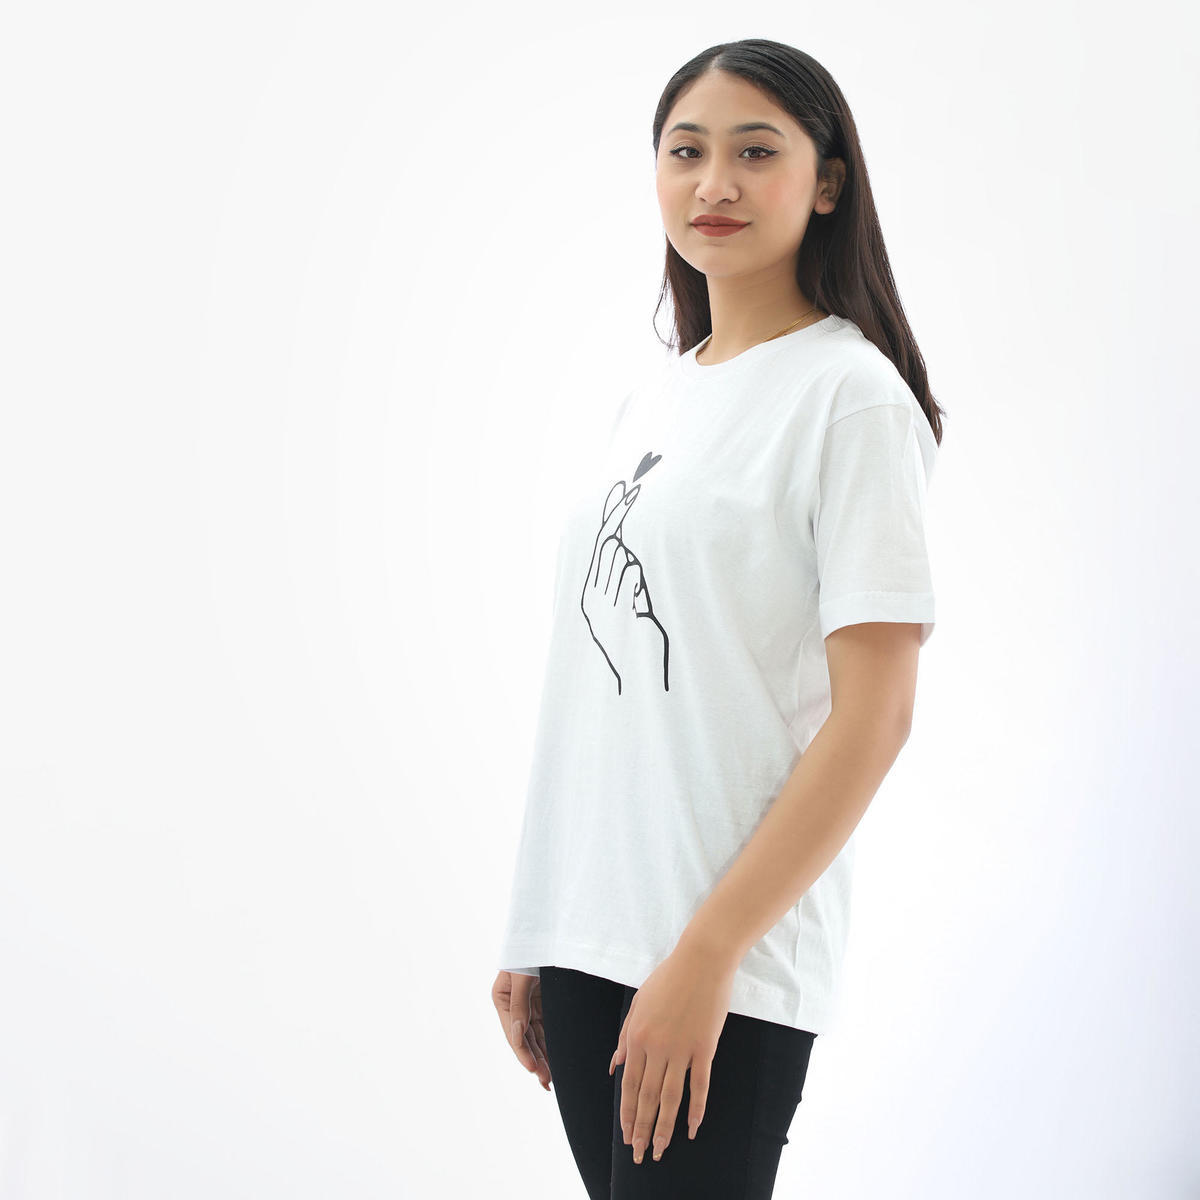 binay embroidery white printed casual t shirt for women